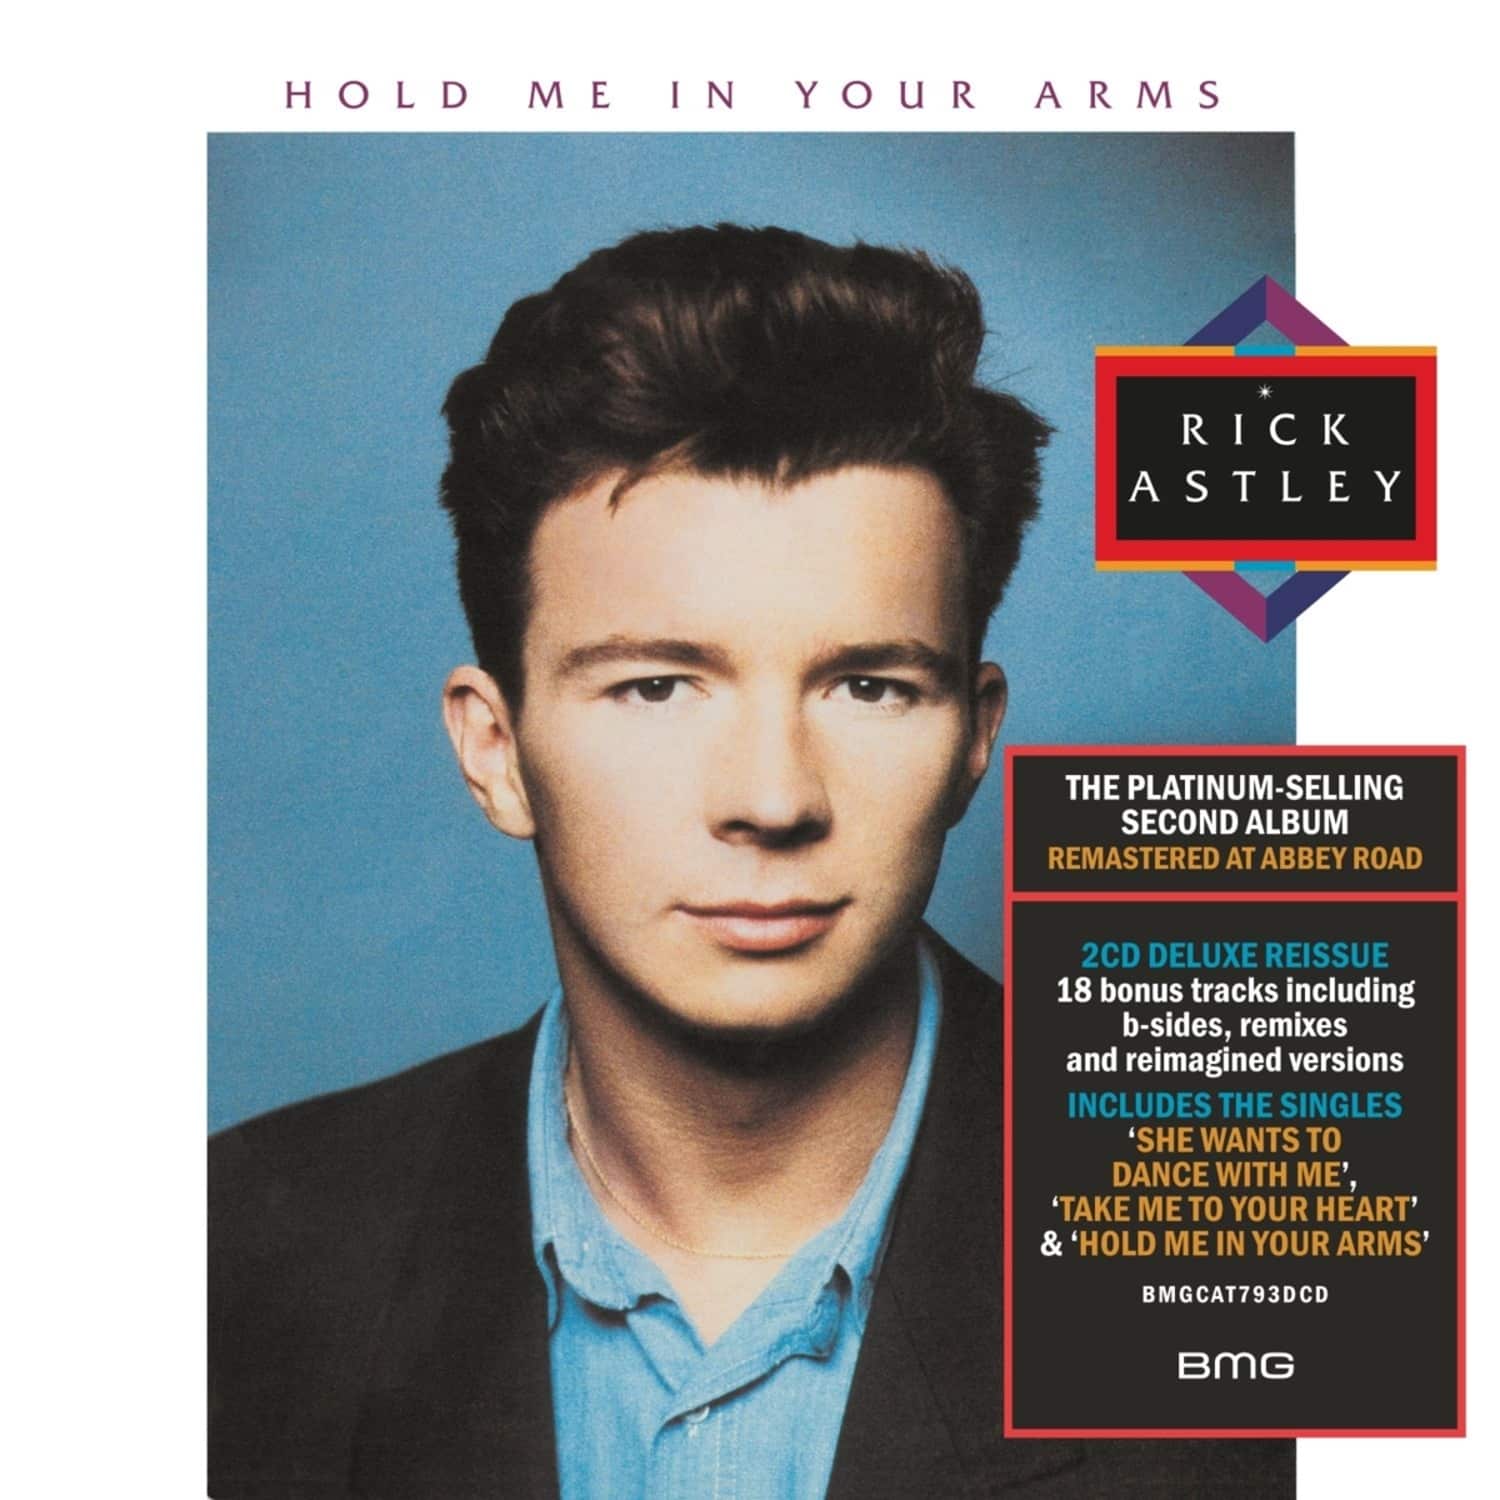  Rick Astley - HOLD ME IN YOUR ARMS 